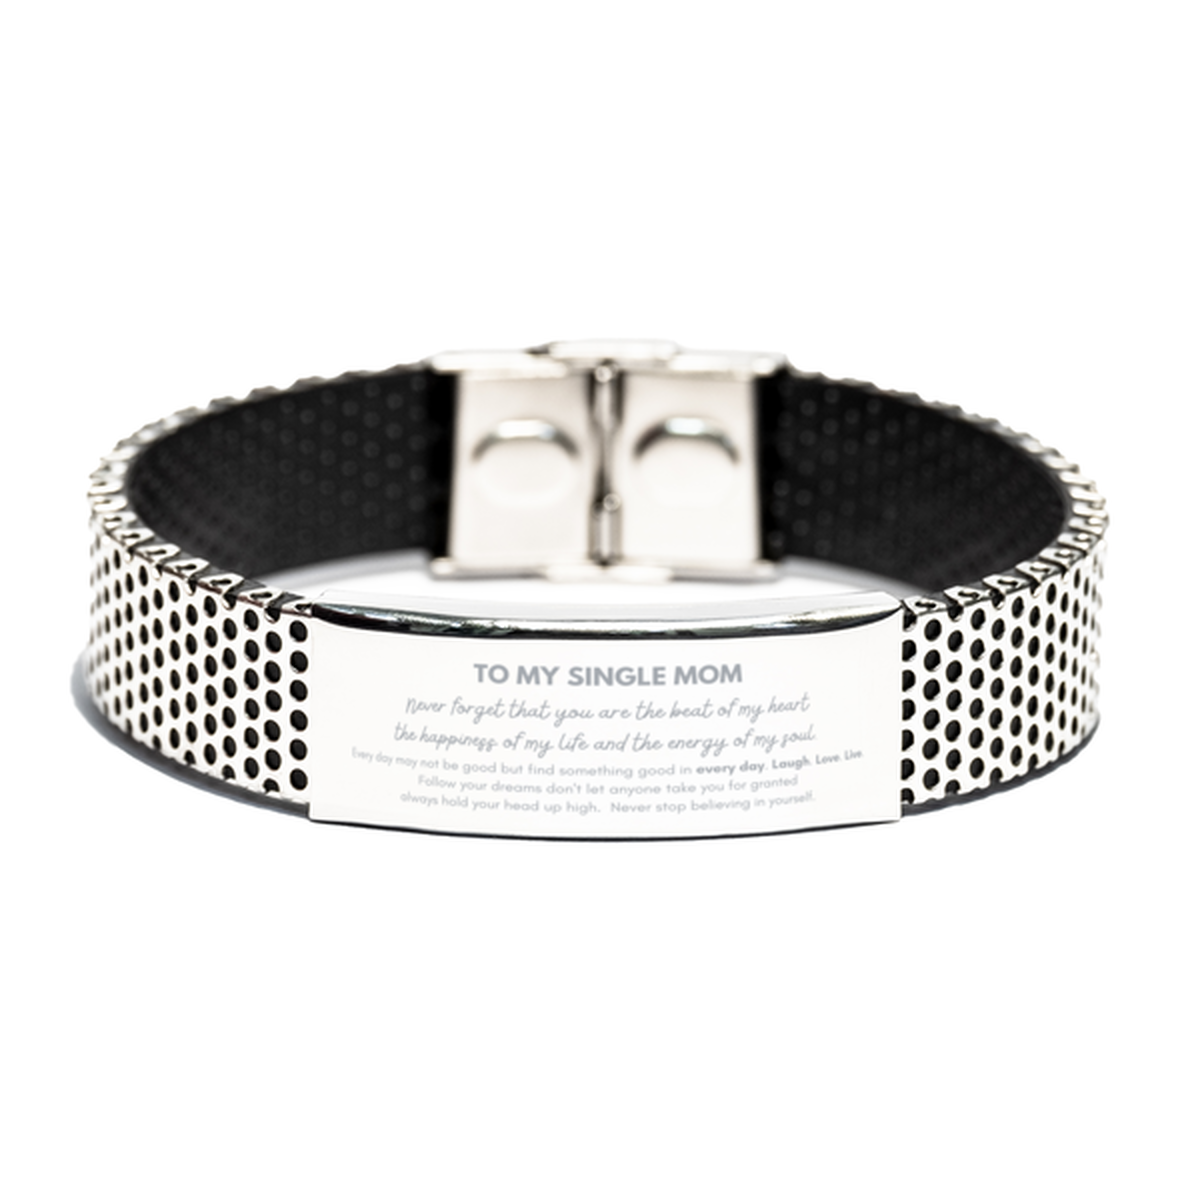 To My Single Mom Bracelet Gifts, Christmas Single Mom Stainless Steel Bracelet Present, Birthday Unique Motivational For Single Mom, To My Single Mom Never forget that you are the beat of my heart the happiness of my life and the energy of my soul